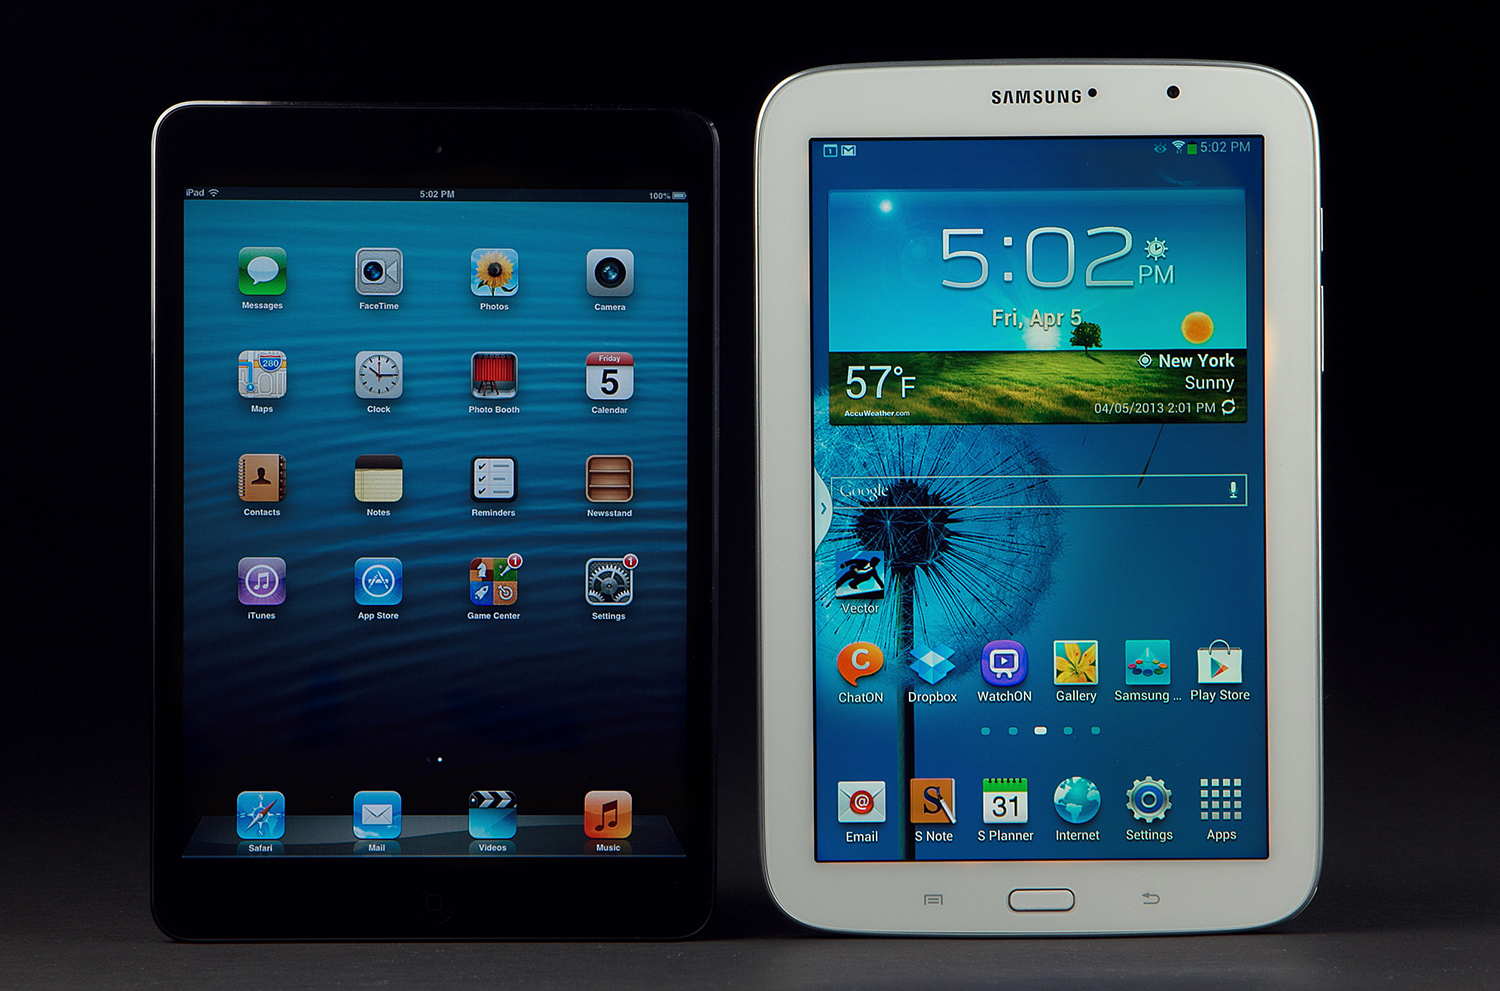 Samsung Galaxy Note 8.0 Review | 8-inch Android Tablet | Digital ...